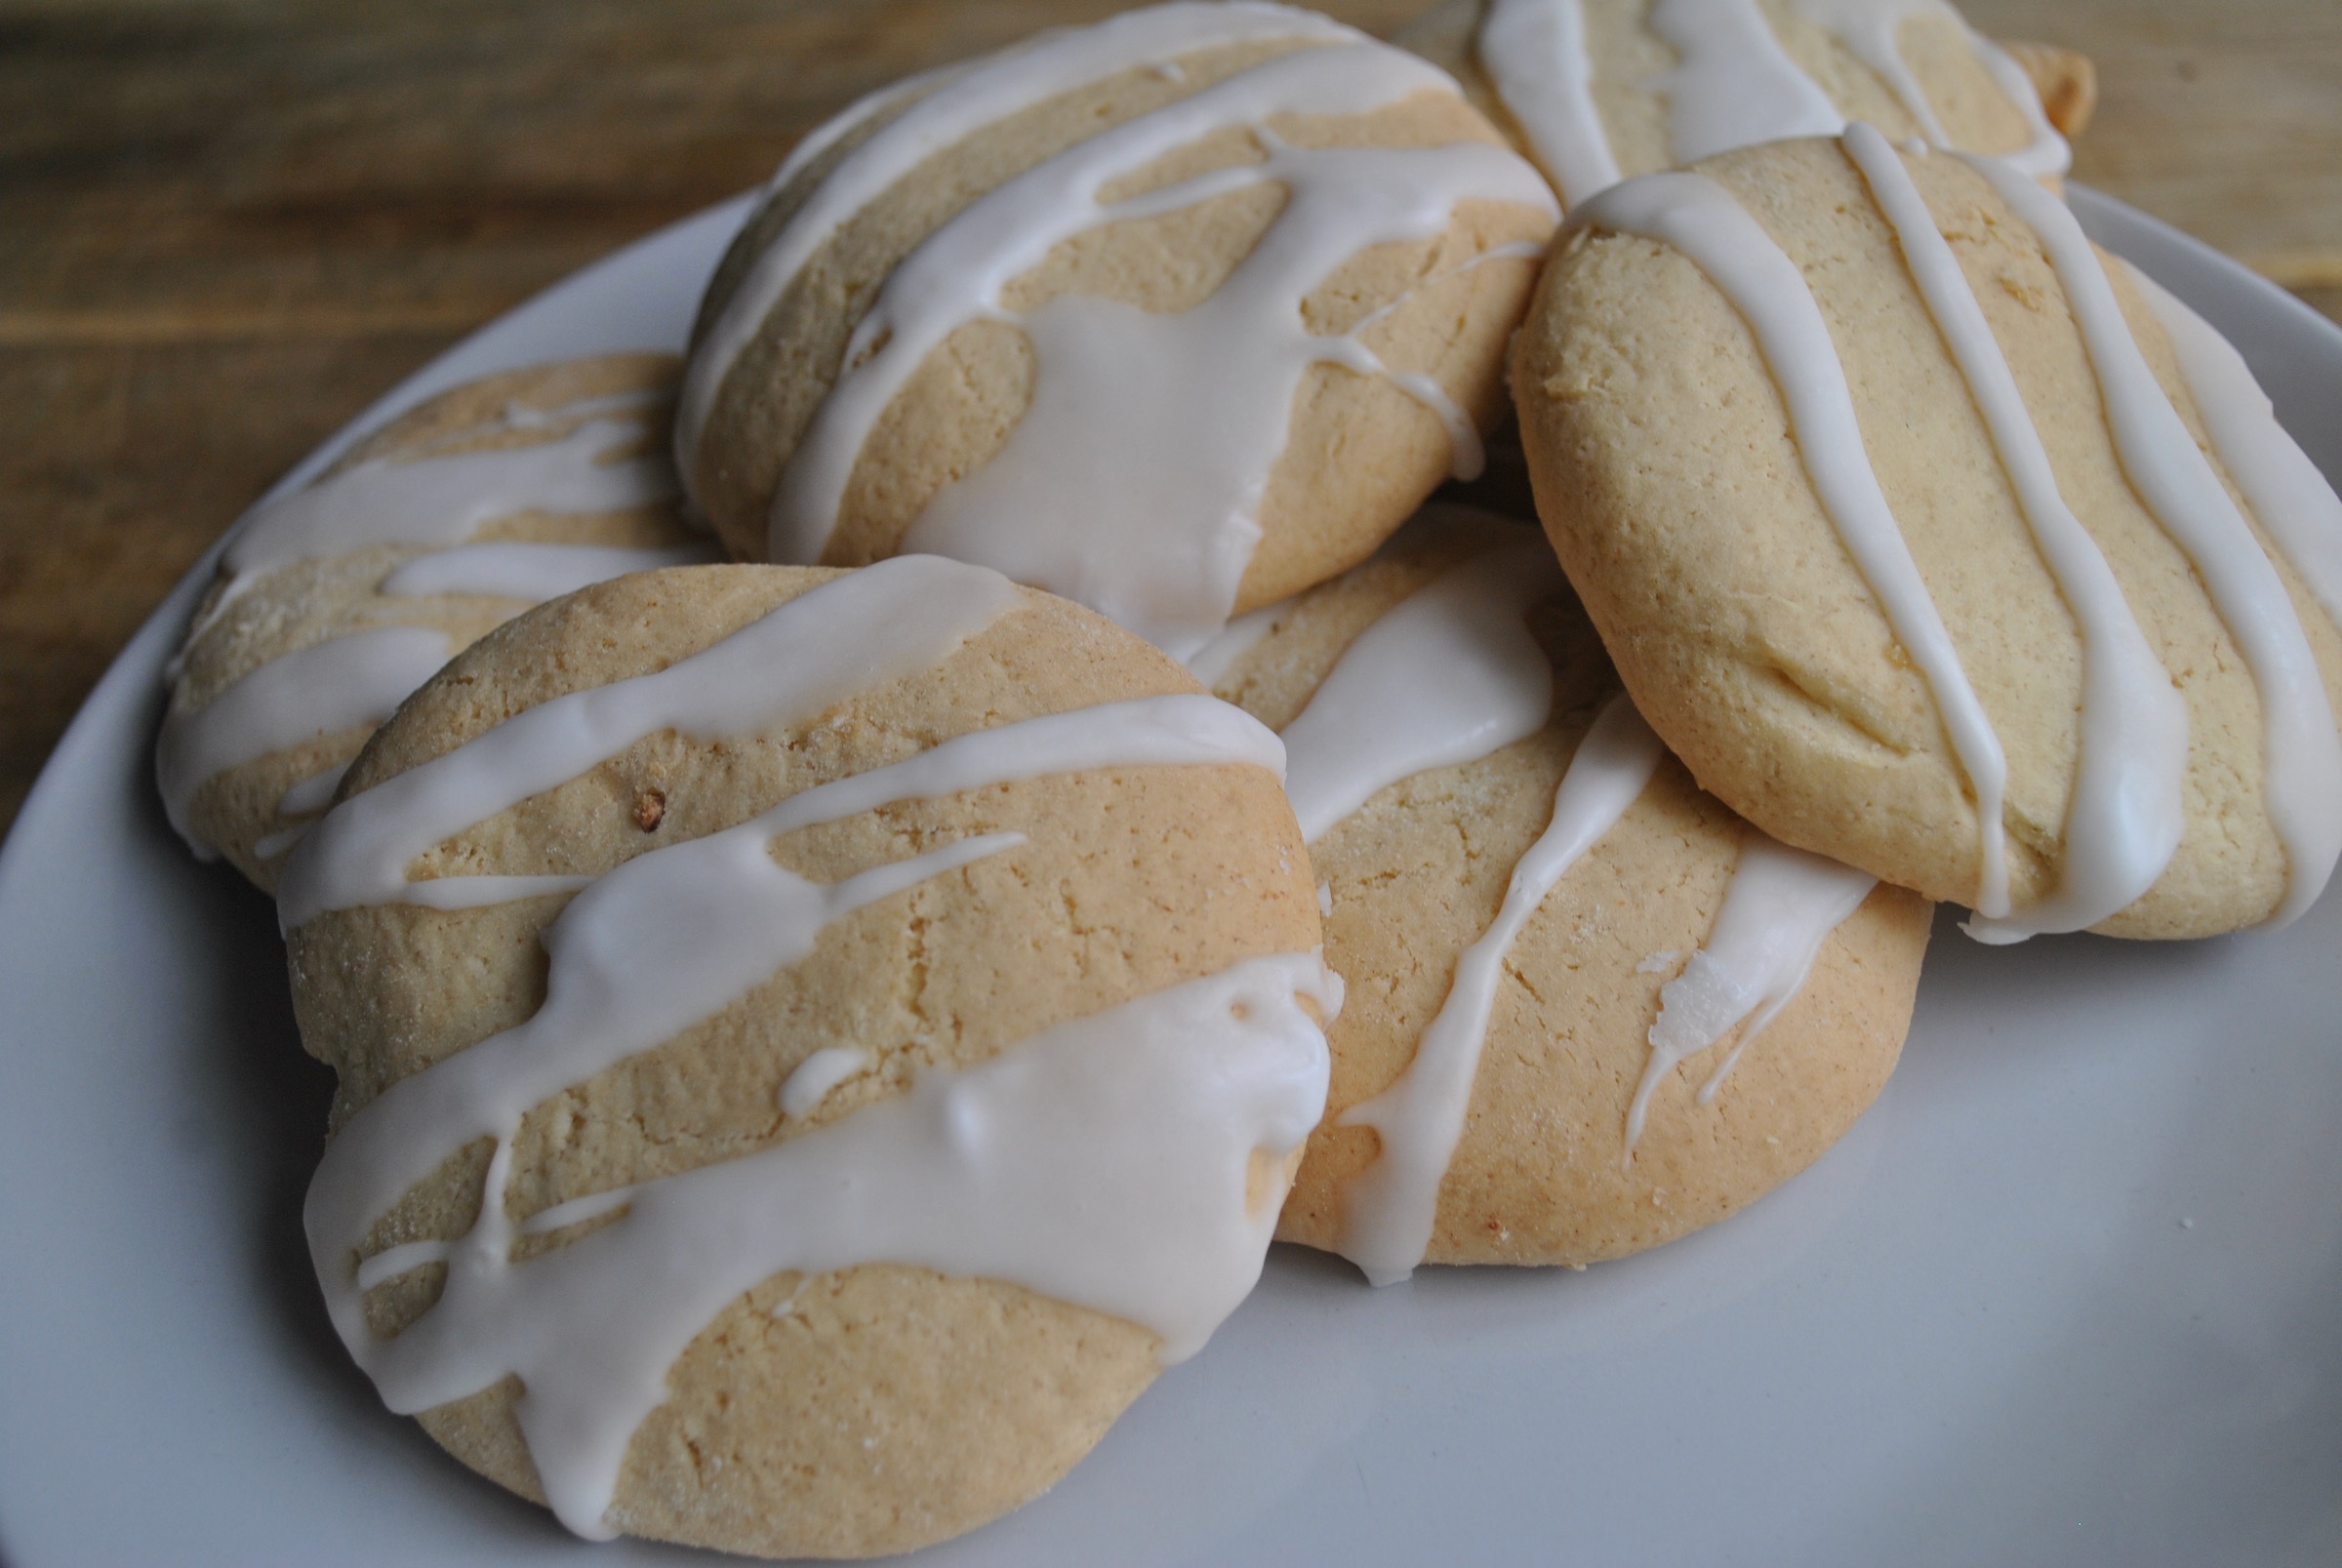 iced biscuits recipe - 1